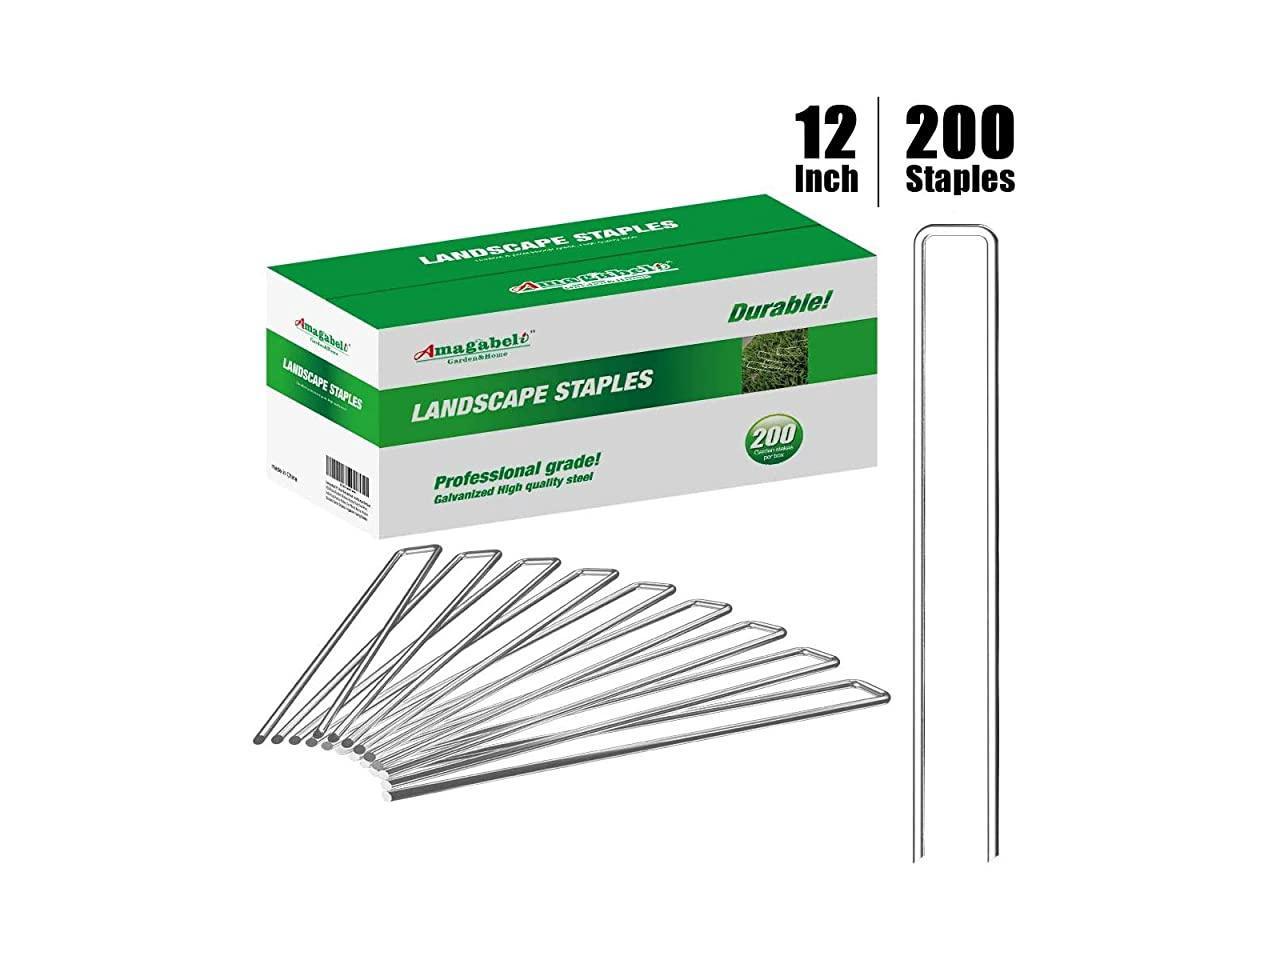 Commercial Grade 8" Weed Barrier Fabric Stakes Landscape Staples Sod Staples 